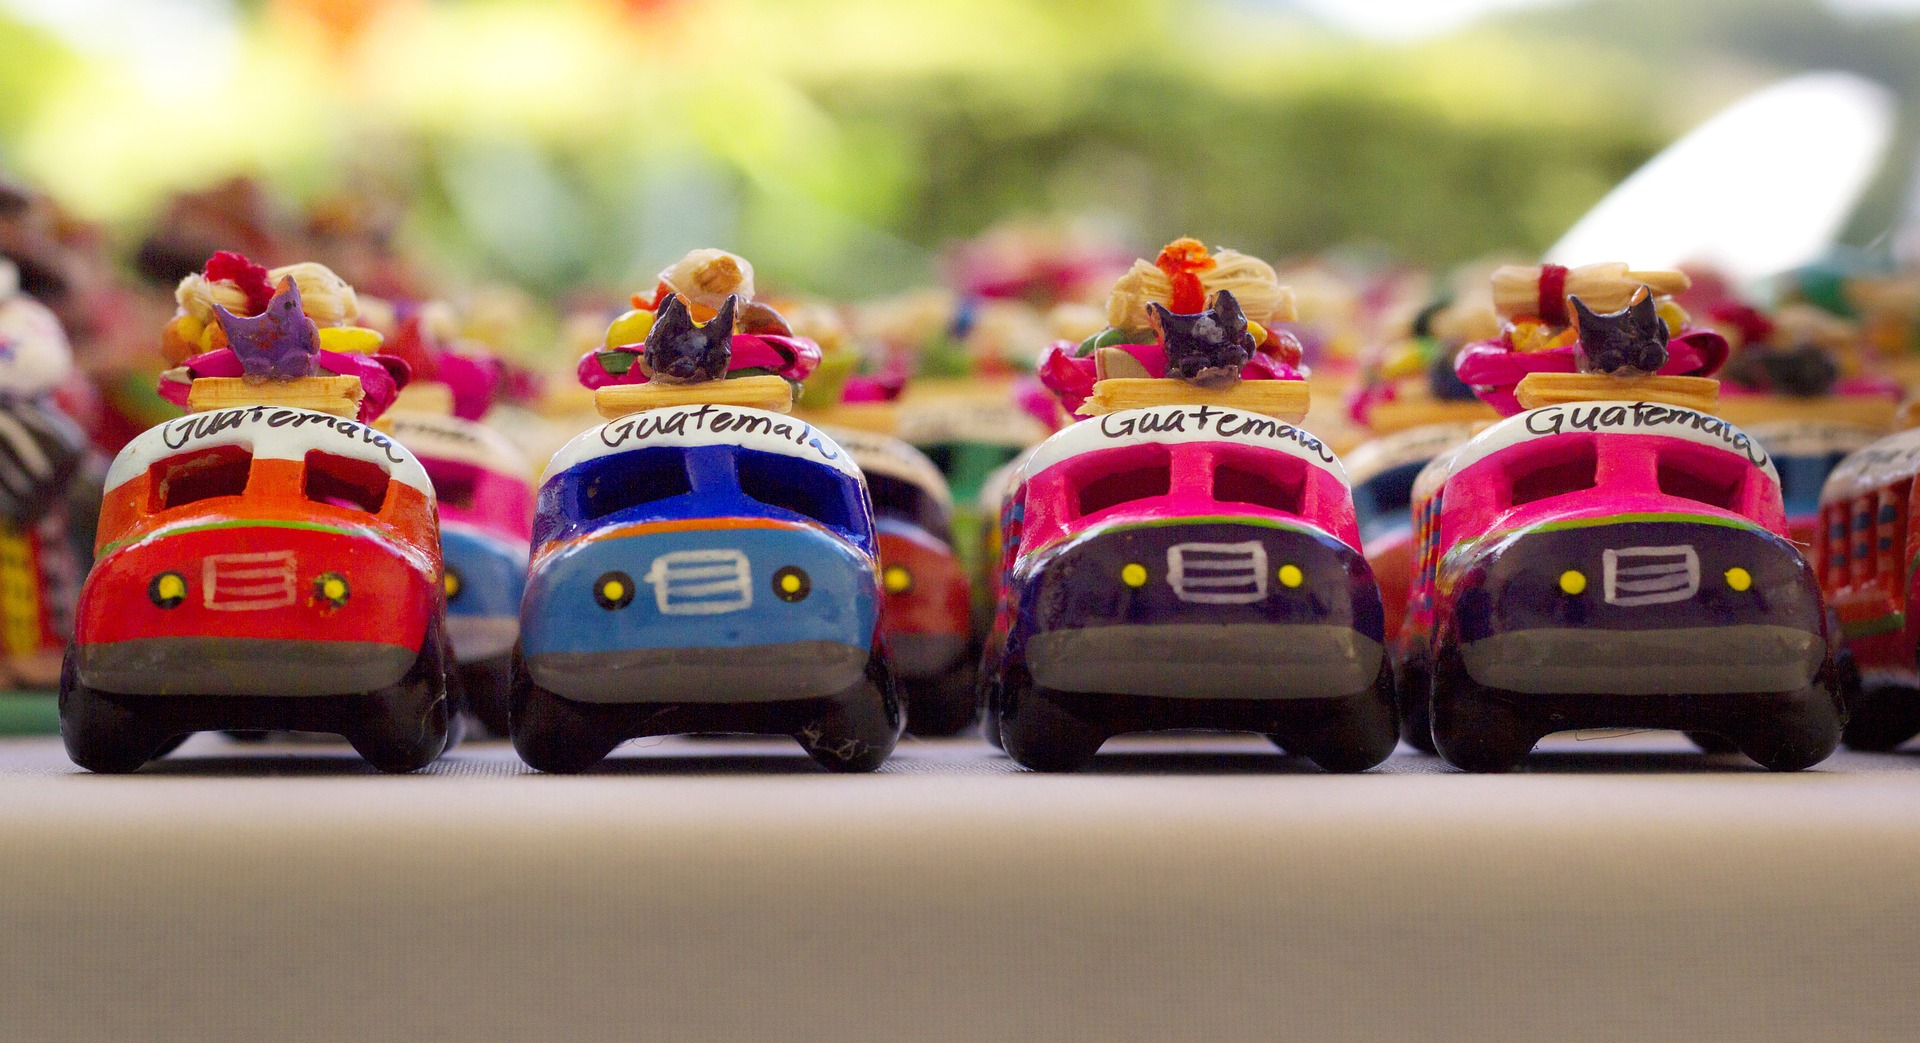 Ornamental toy buses in Guatemala